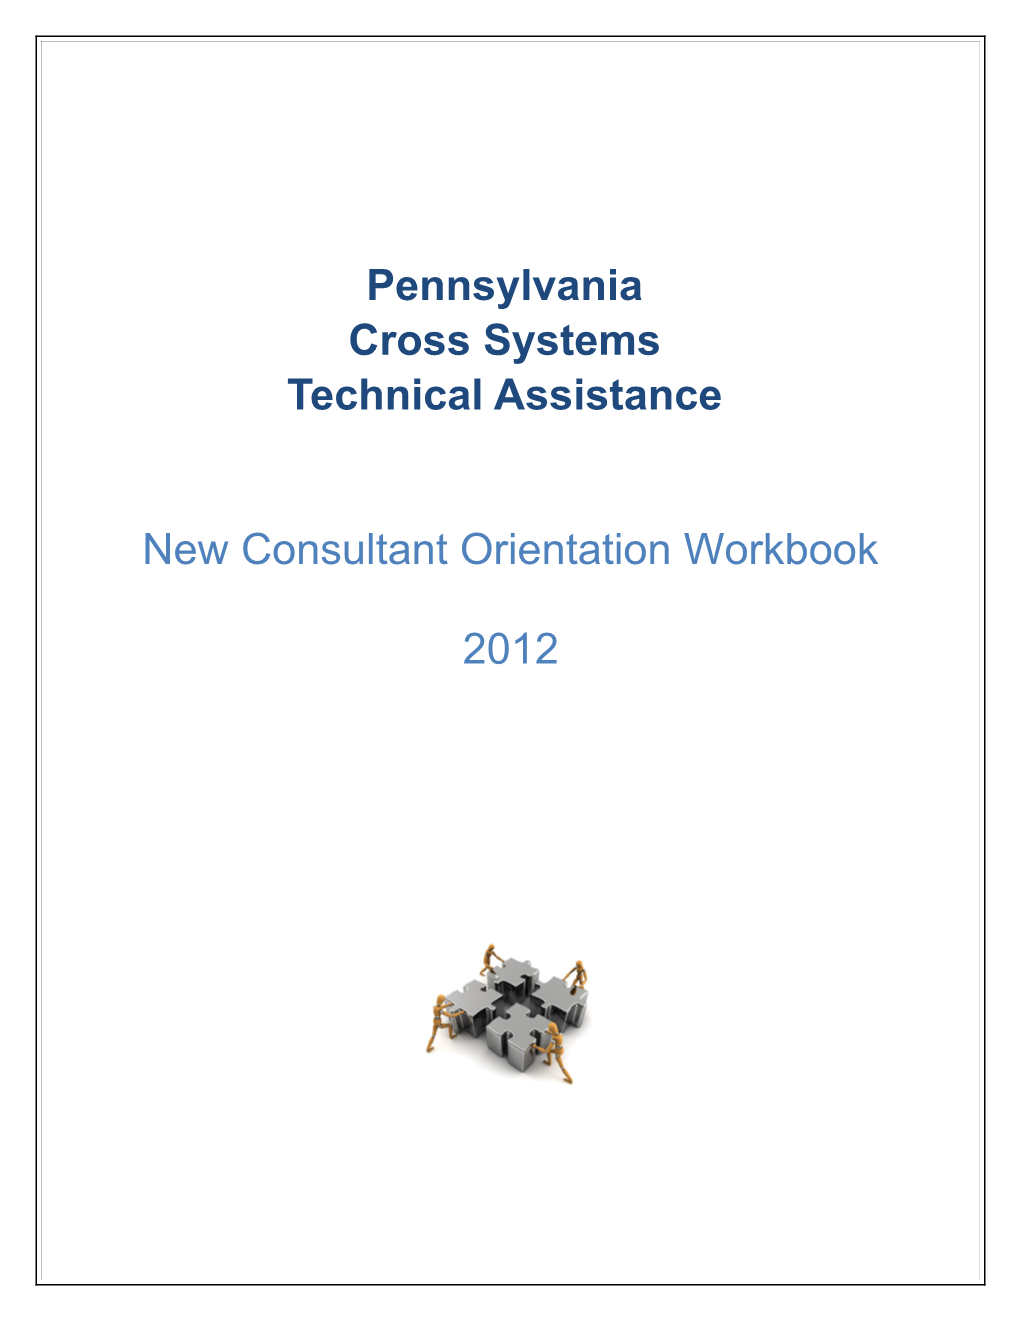 Orientation Guide and Workbook for Pennsylvania S